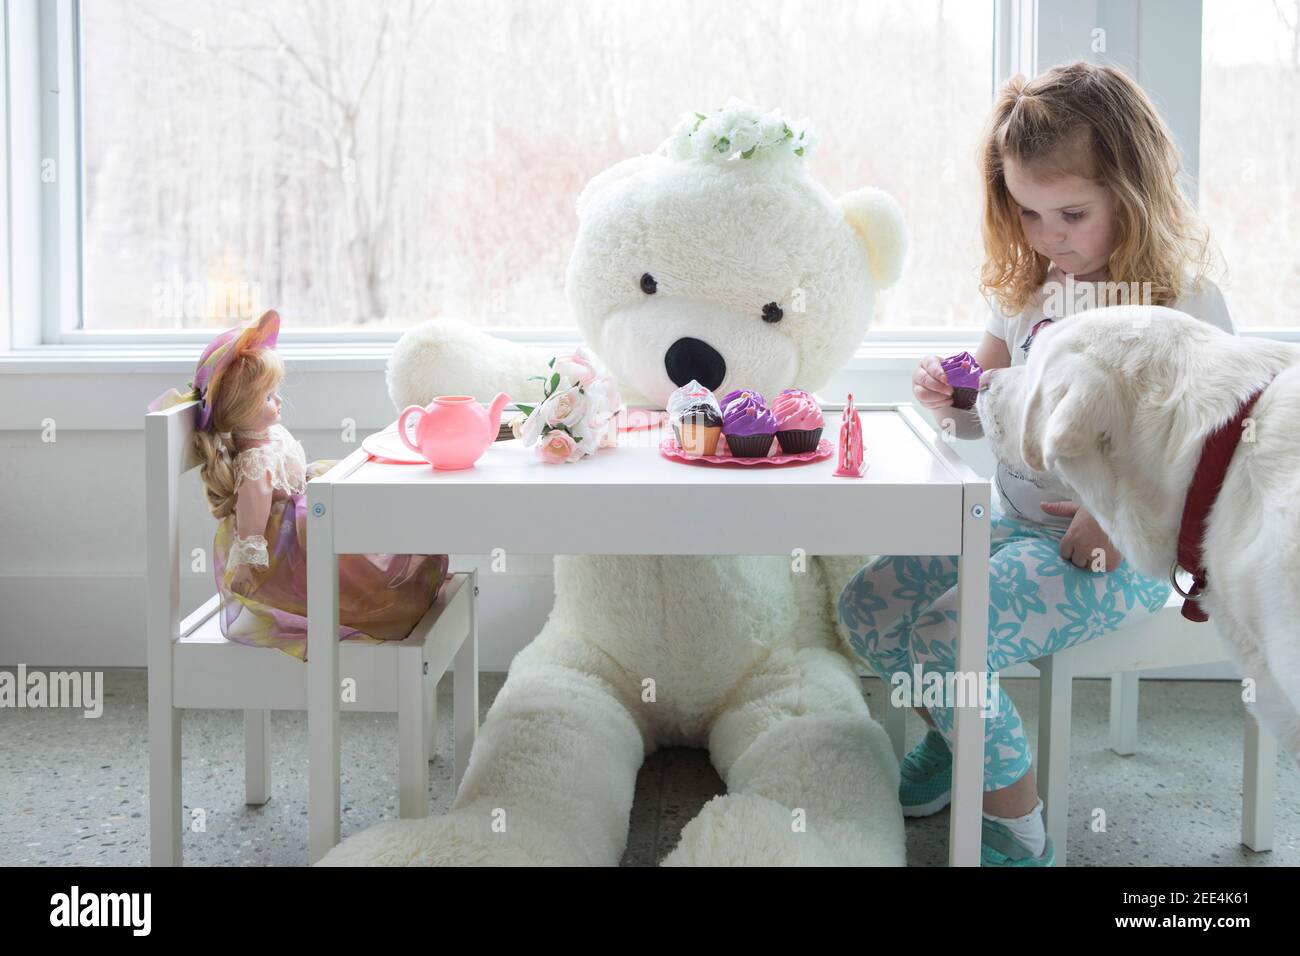 A little girl having a pretend tea party with her dog and toys. Stock Photo